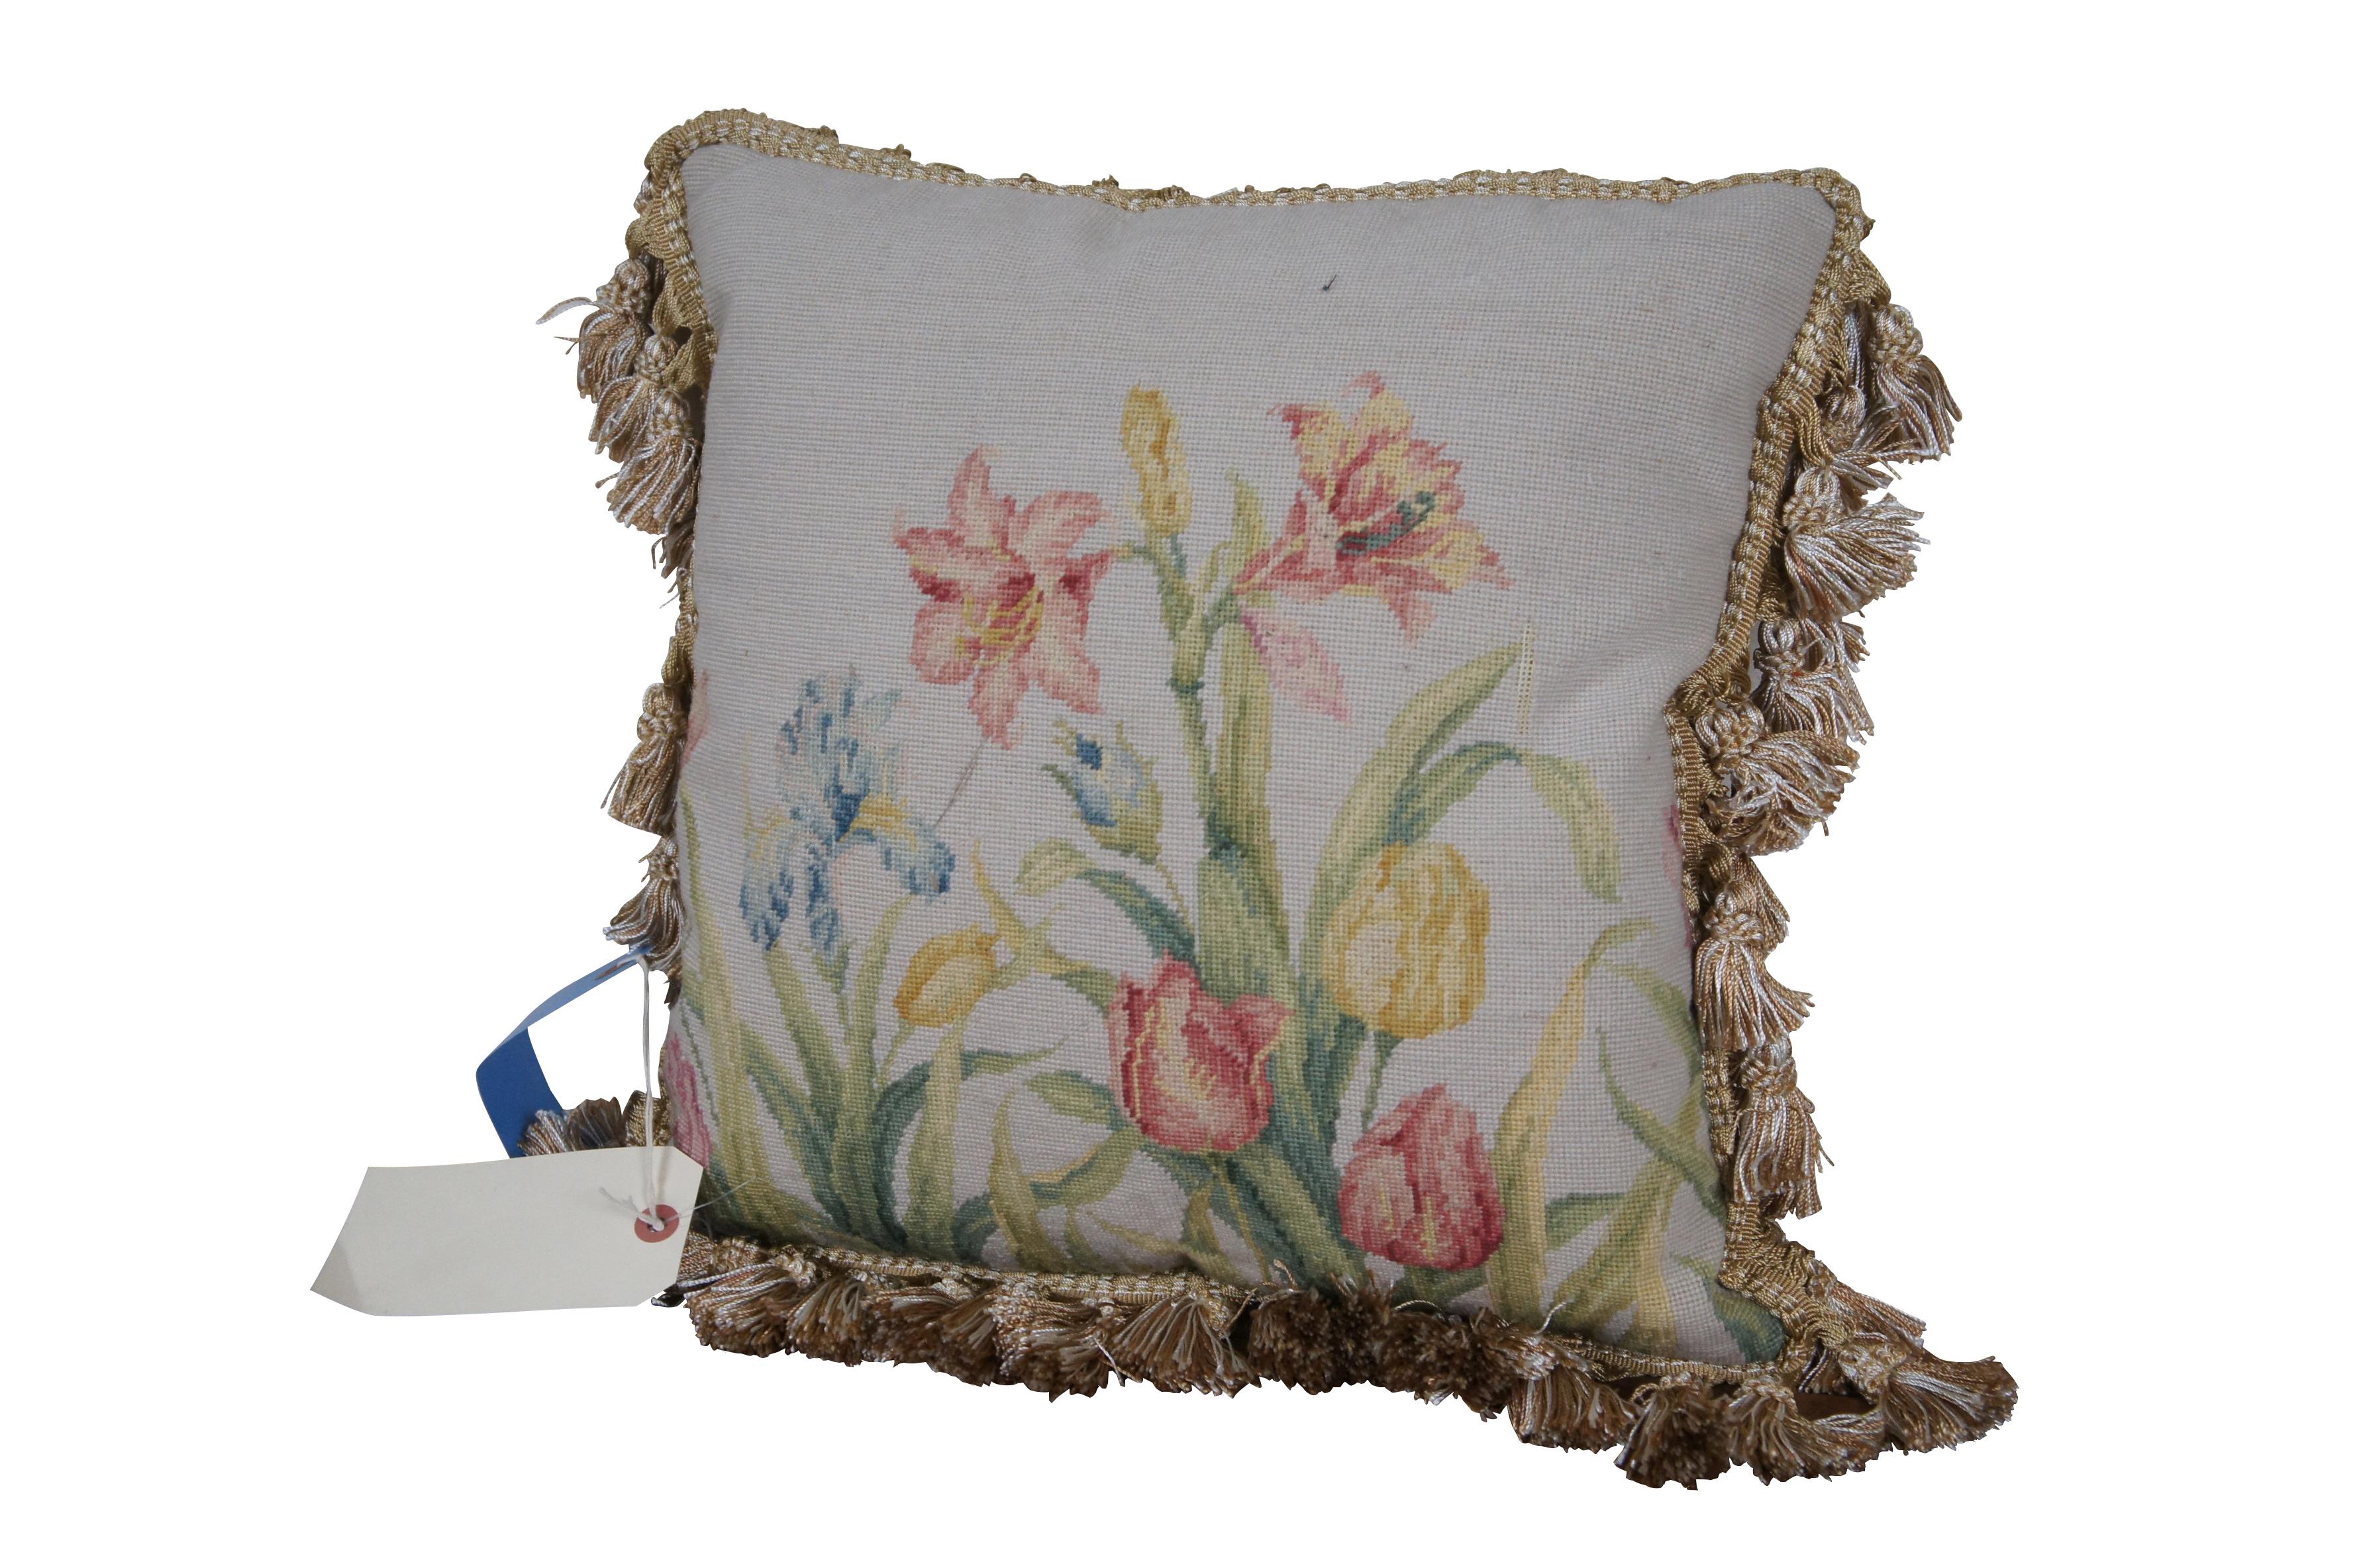 2 Available - 20th century square throw pillow, hand embroidered with a floral garden view of pink, yellow, and blue lilies, tulips, and irises. Beige and white tassel trim. Beige velour back with zipper closure. Down filled.

Dimensions:
16